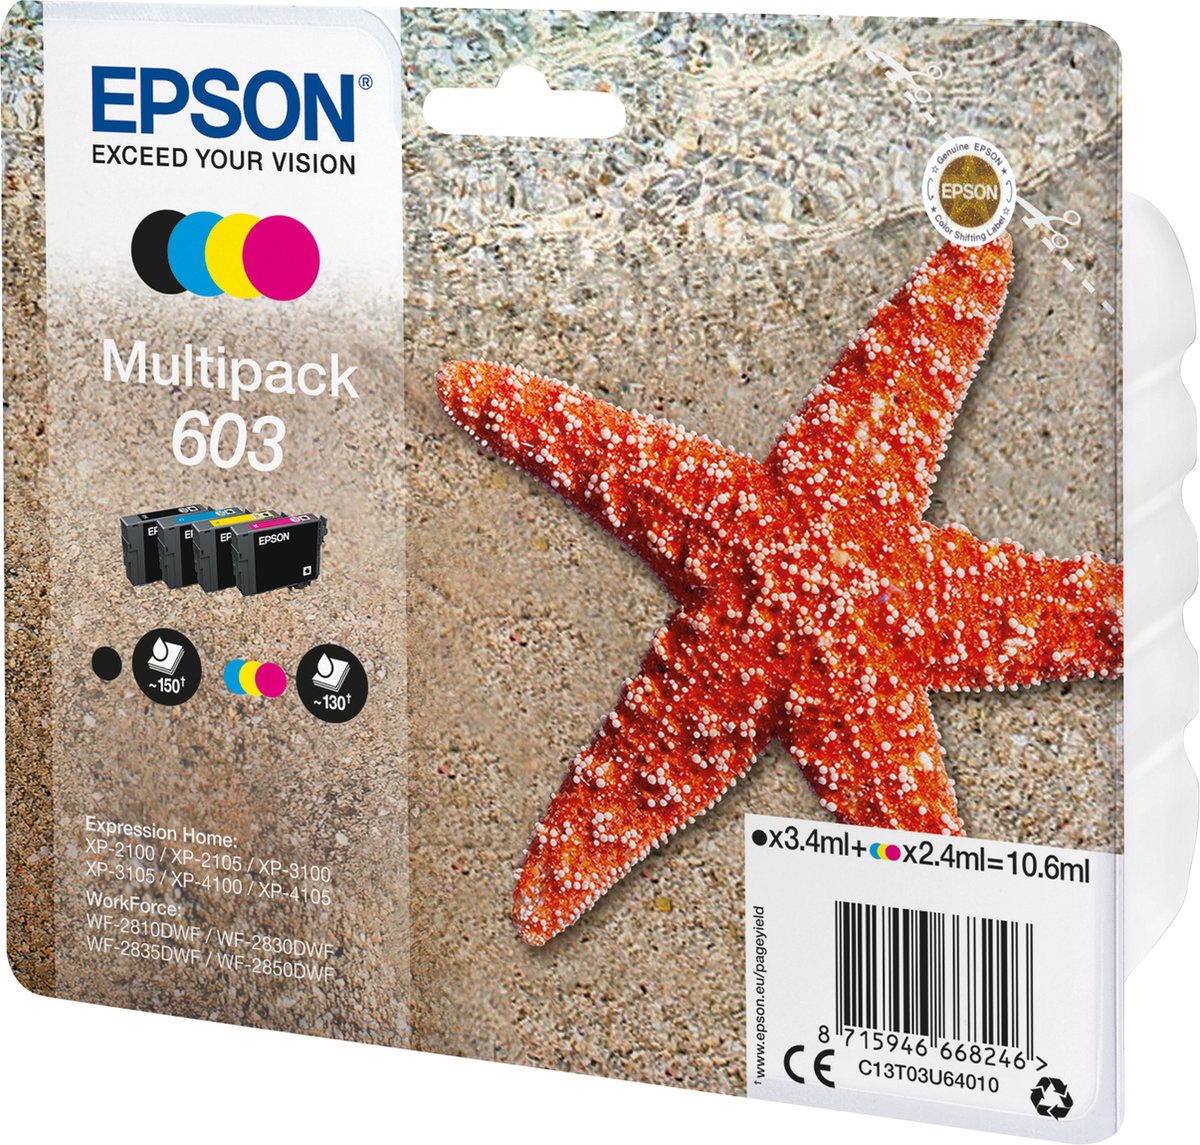 Epson Multipack 4-colours 603 Ink | bol